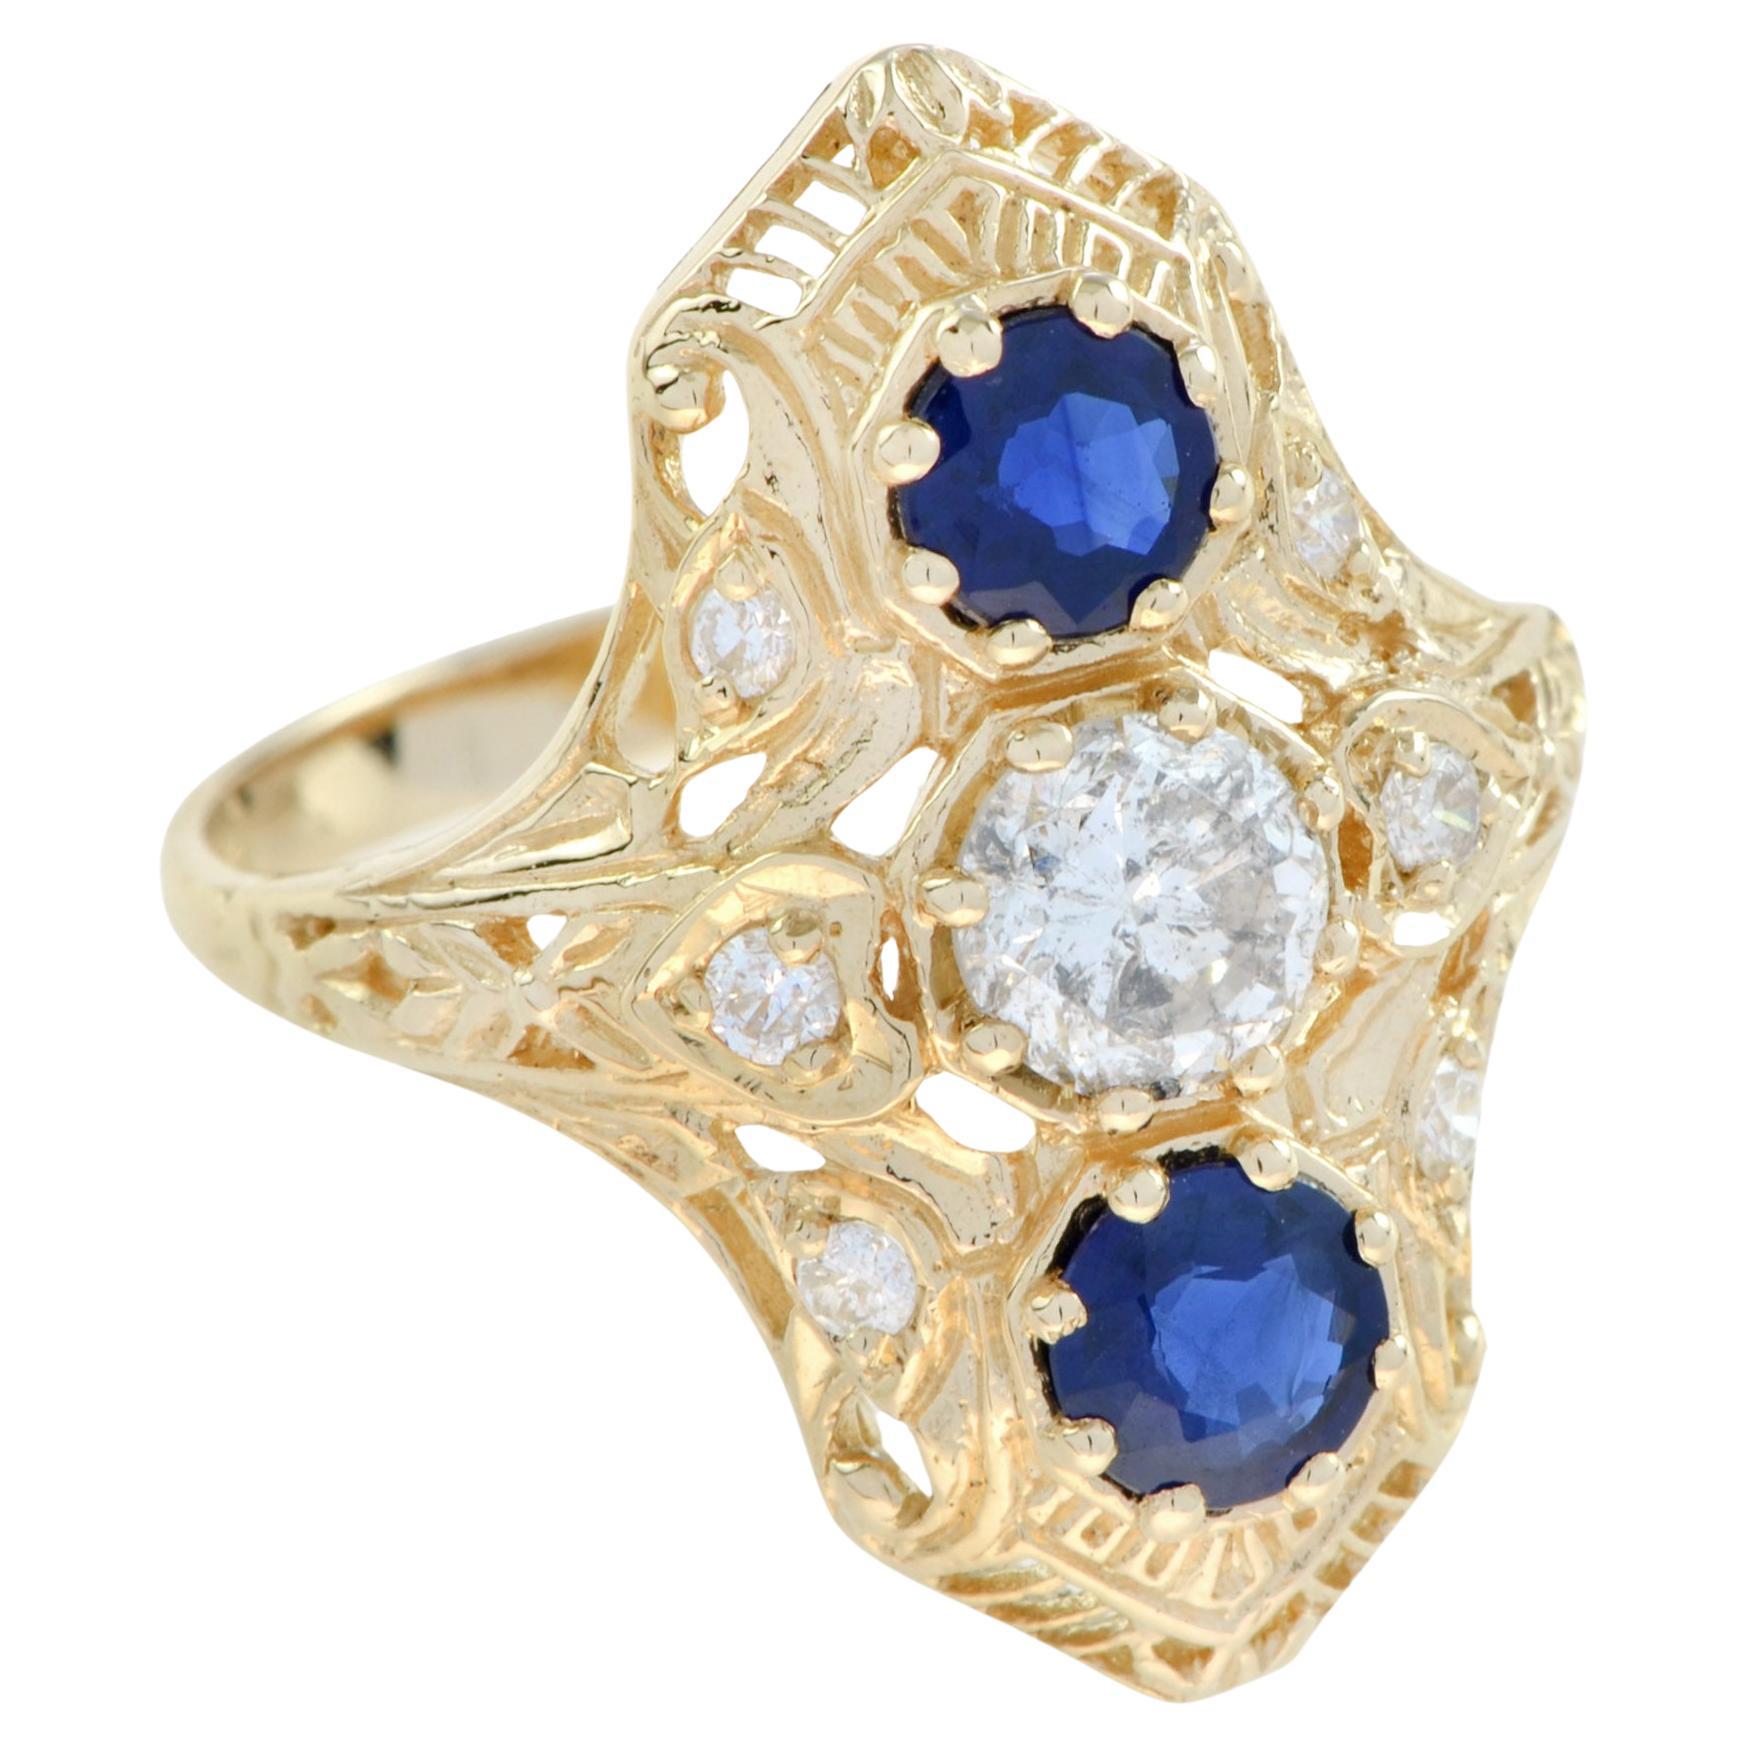 For Sale:  Diamond and Blue Sapphire Antique Style Filigree Three Stone Ring in 9K Gold